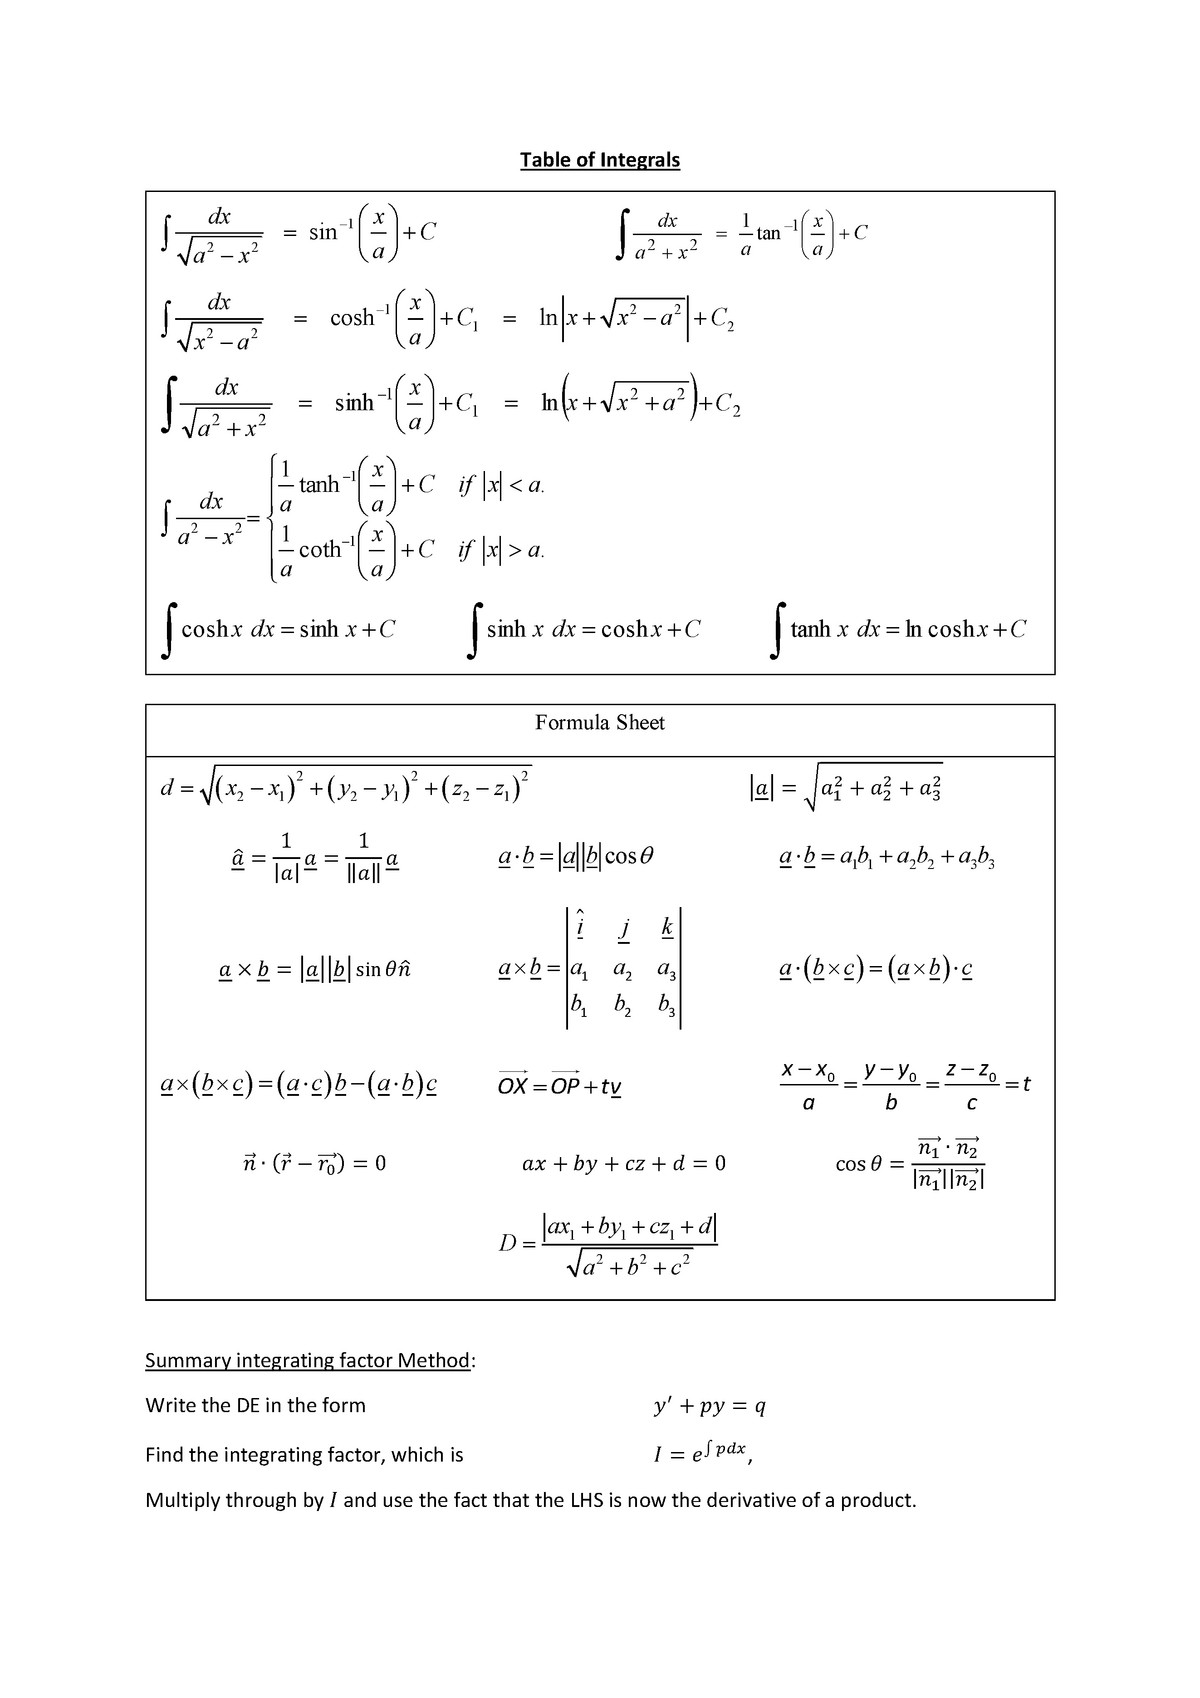 Physical Modelling 1 - Equation Sheet - Table of Integrals 1 22 sin dx ...